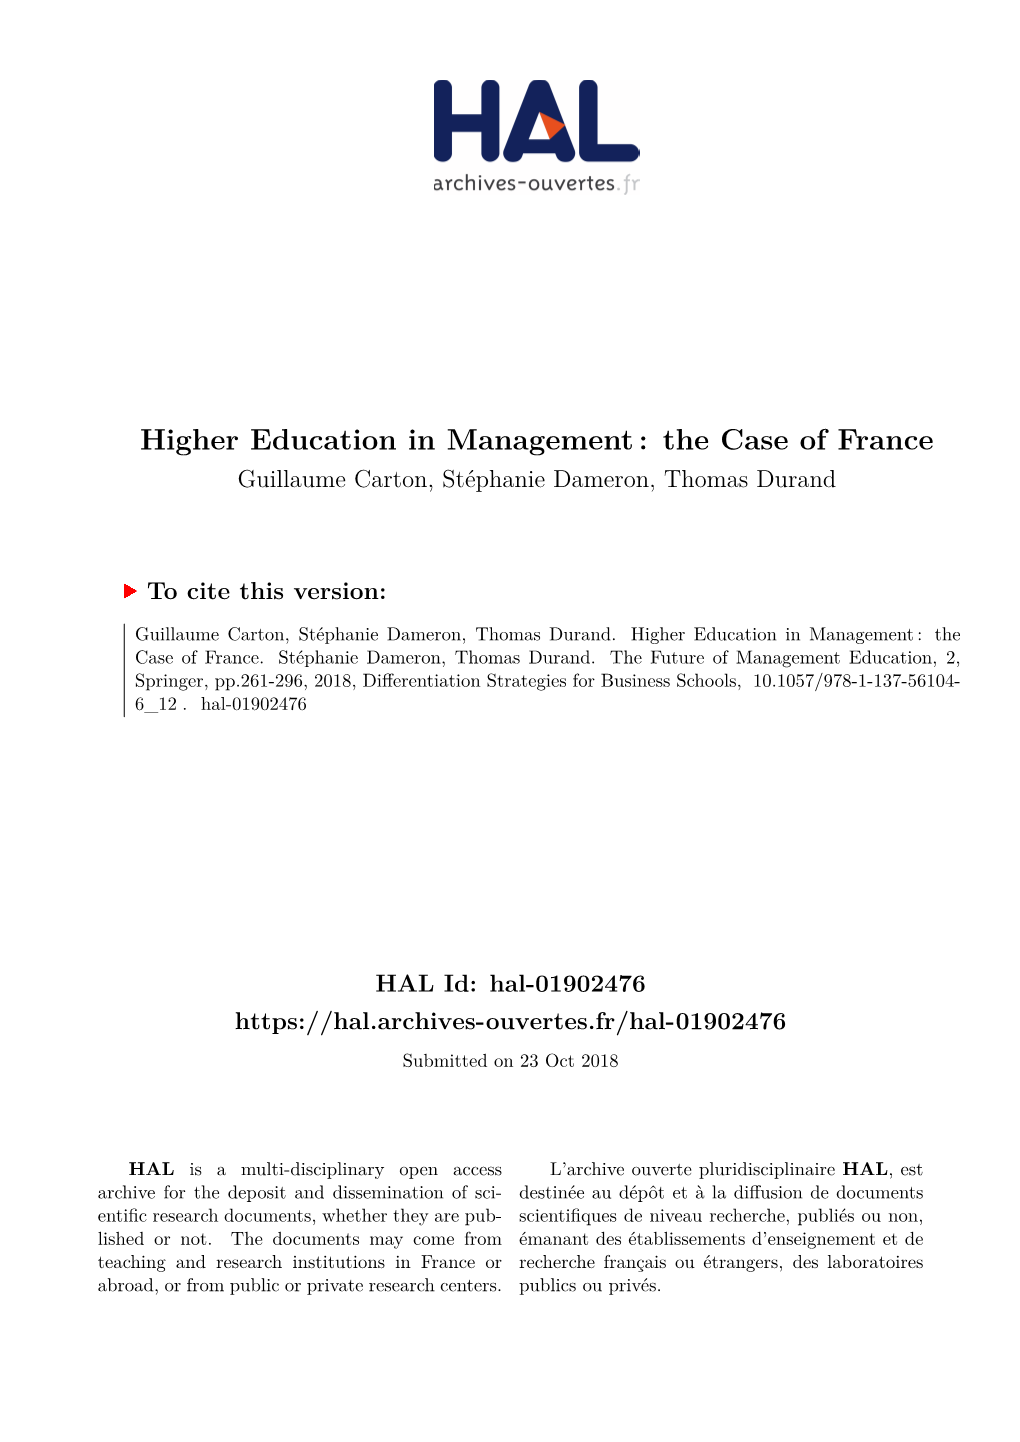 Higher Education in Management: the Case of France